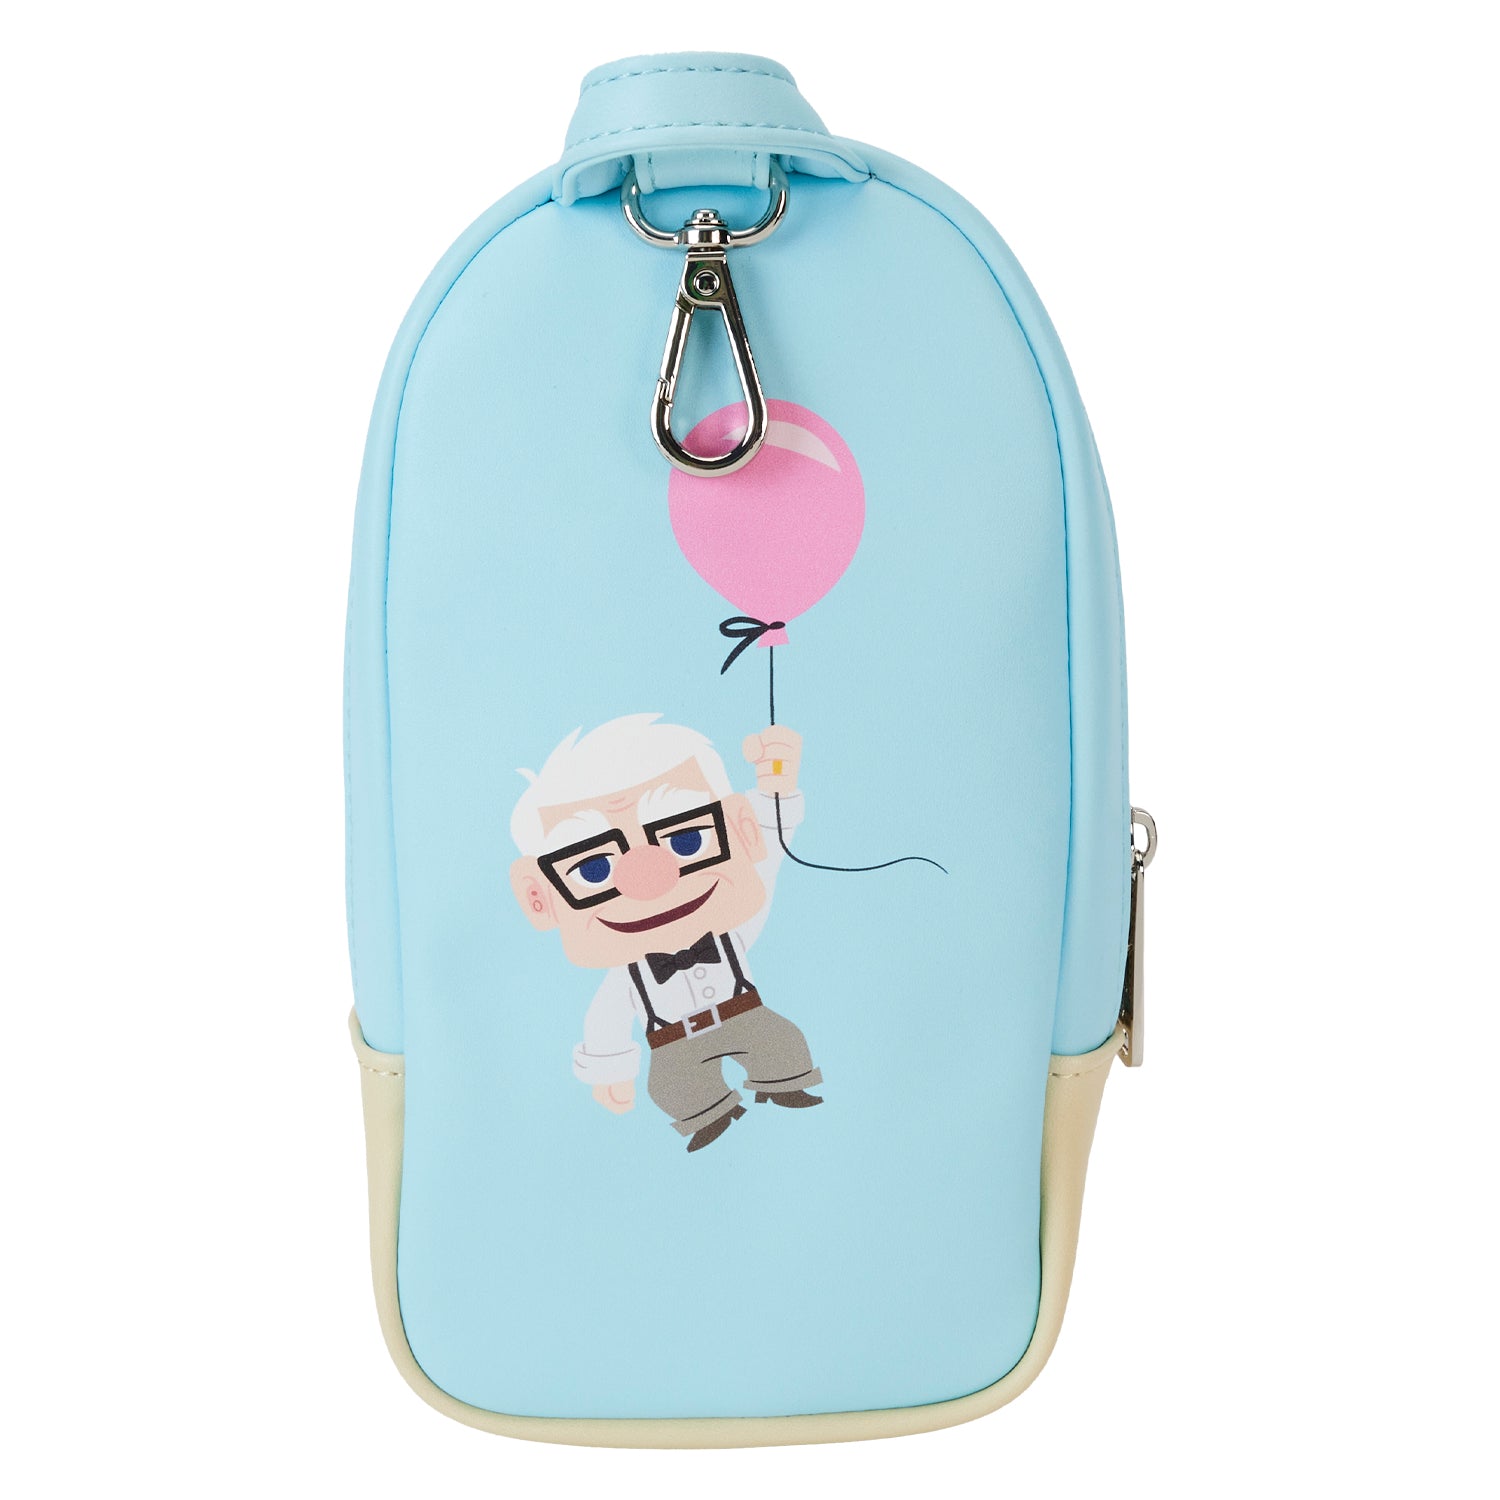 Loungefly Pixar Up 15th Anniversary Balloon House Mini Backpack Pencil Case